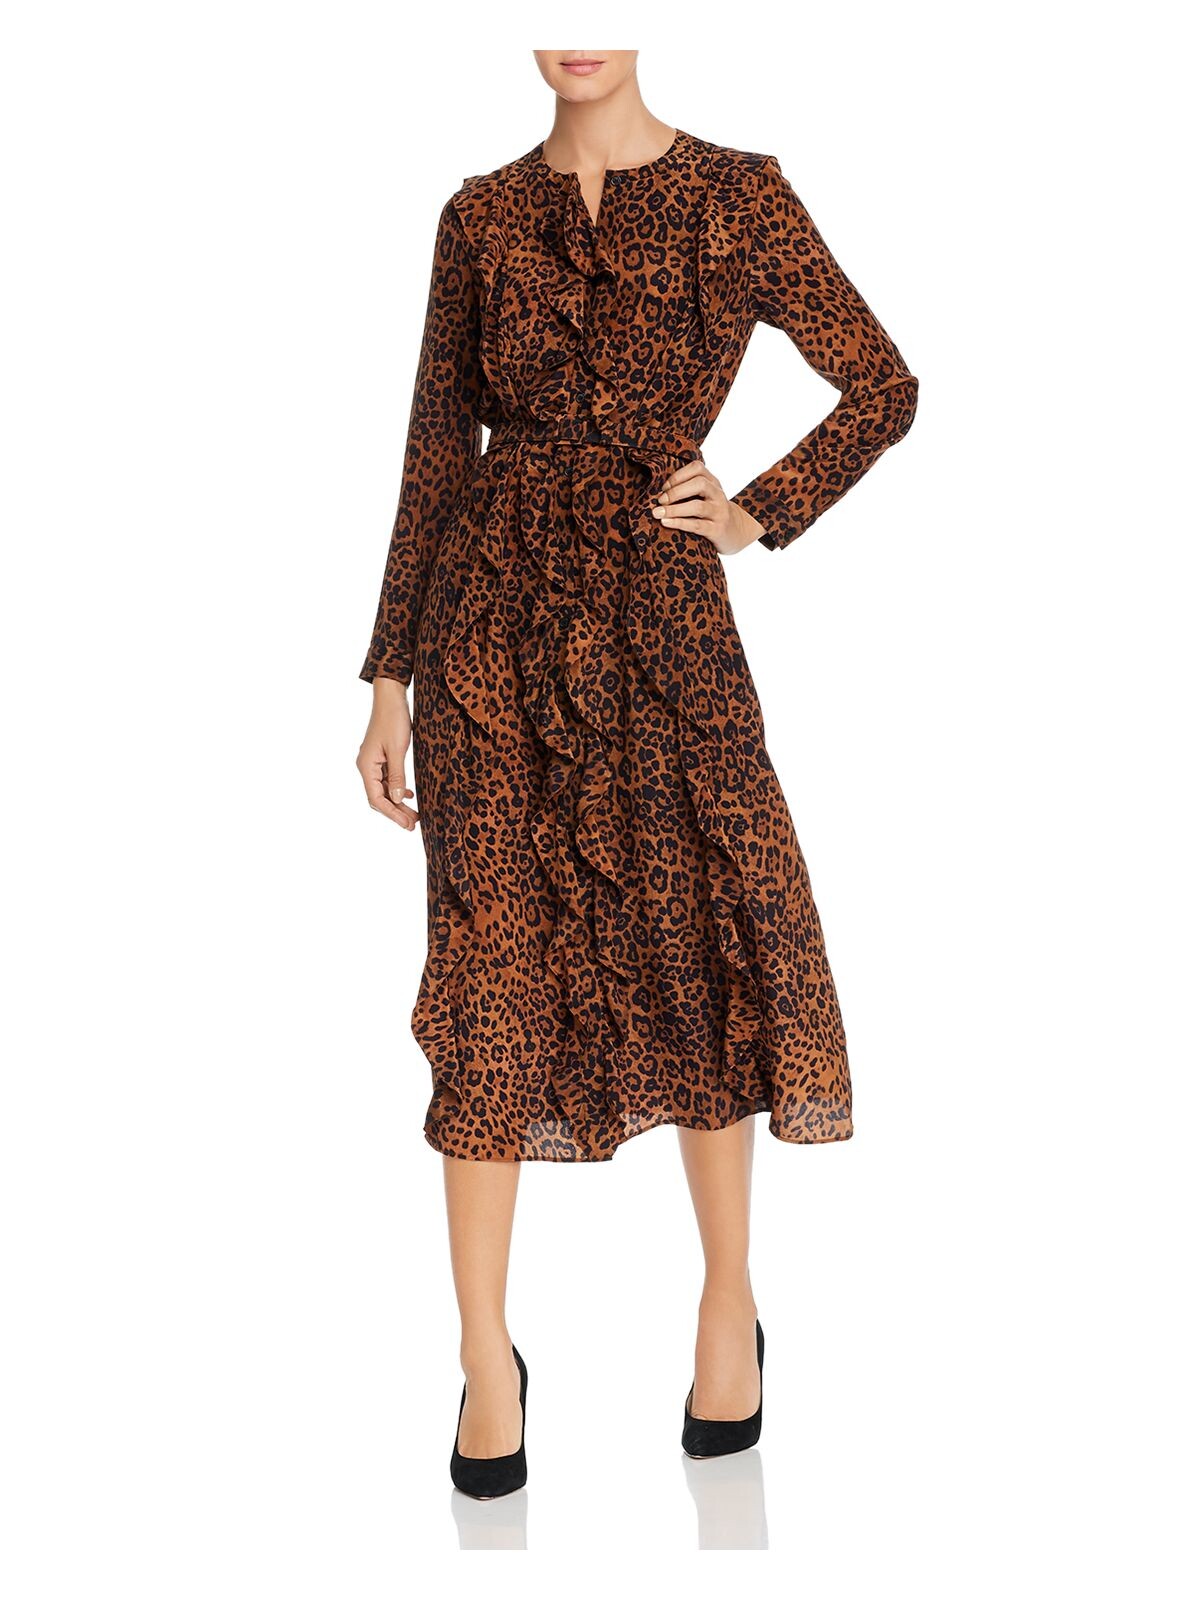 LAFAYETTE 148 NEW YORK Womens Brown Ruffled Belted Button Front Animal Print Long Sleeve Round Neck Midi Wear To Work Fit + Flare Dress L